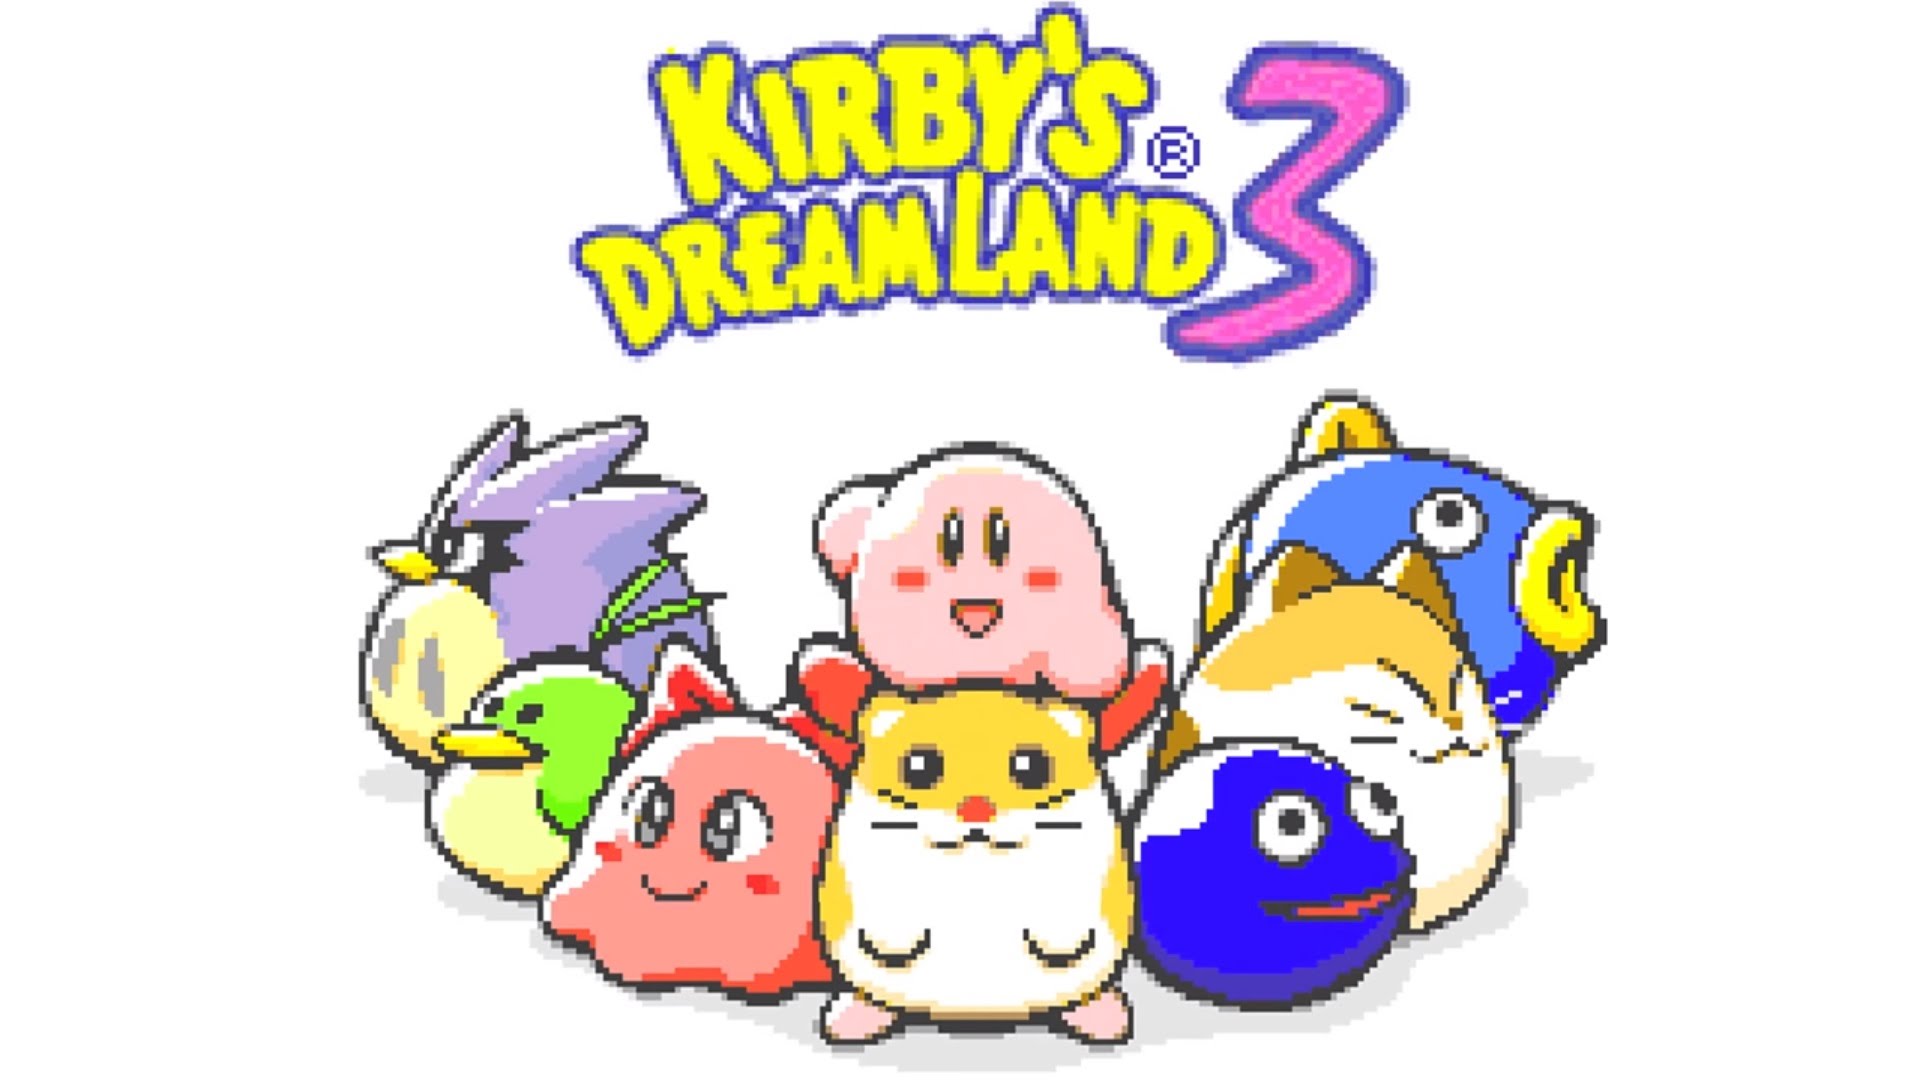 Kirby's Dream Buffet is a Great Example of the Series' Archival